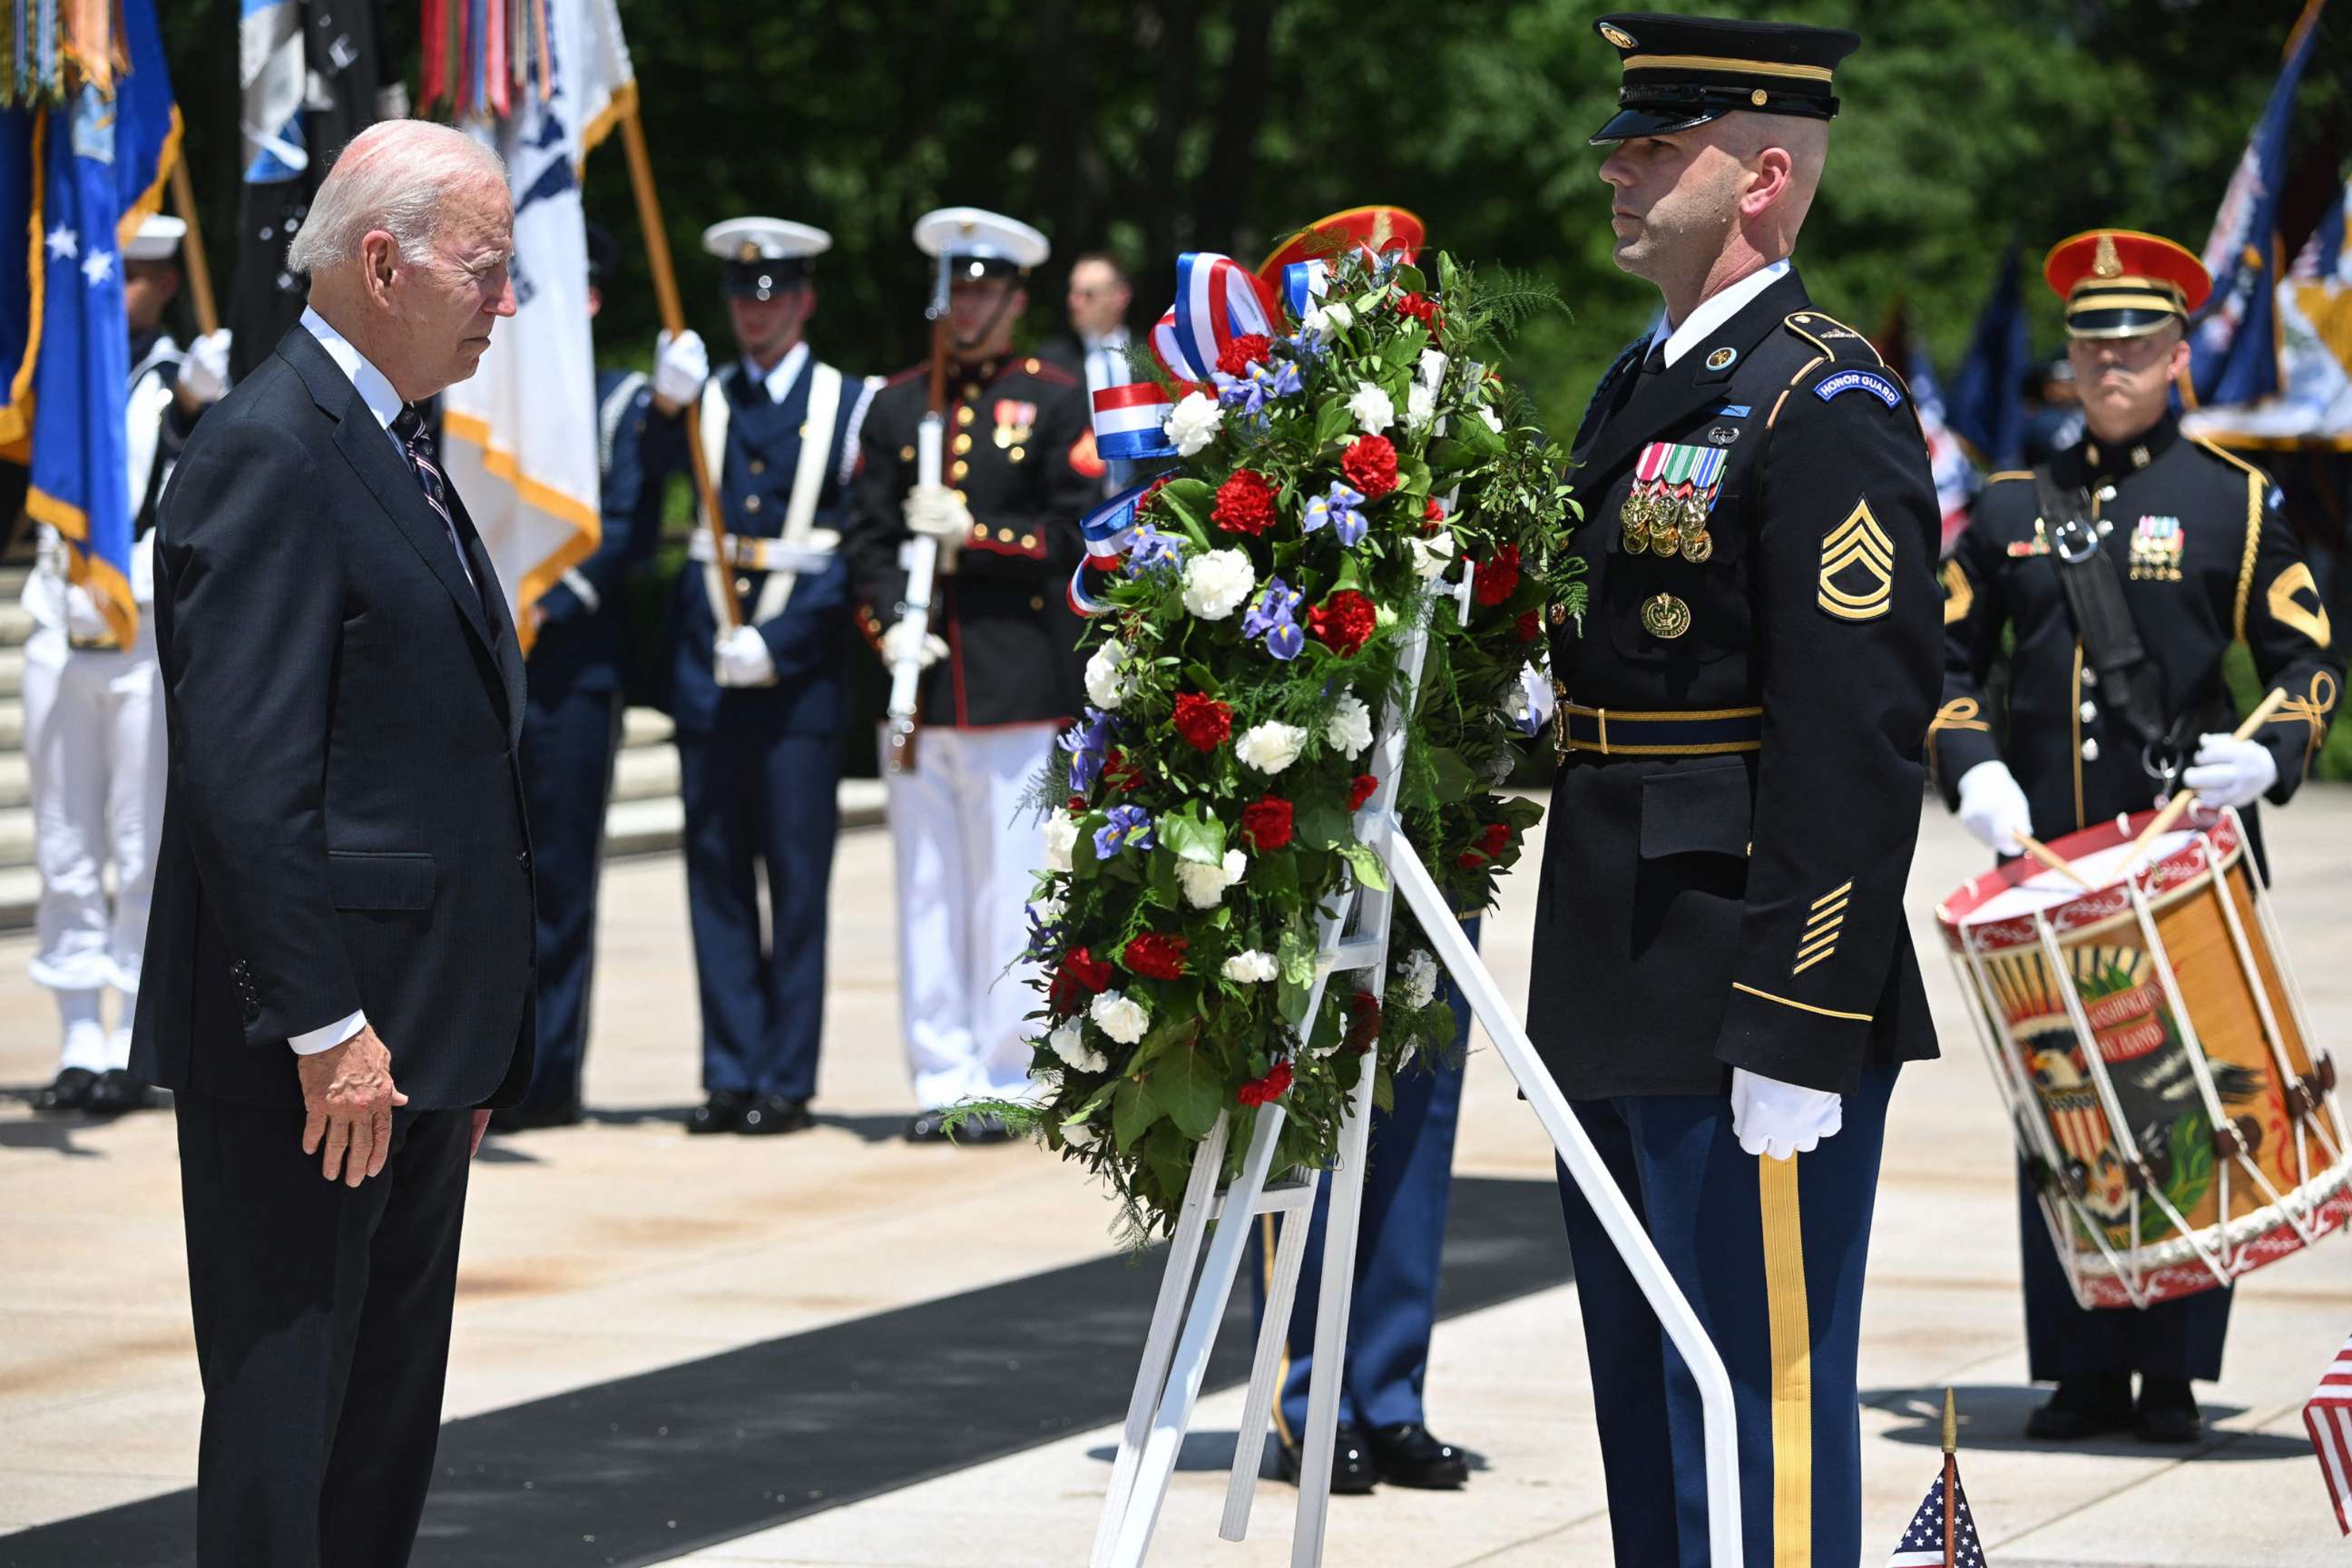 PHOTO: President Joe Biden participates in a wreath laying ceremony at the Tomb of the Unknown Soldier on Memorial Day at Arlington National Cemetery in Arlington, Virginia, May 30, 2022.